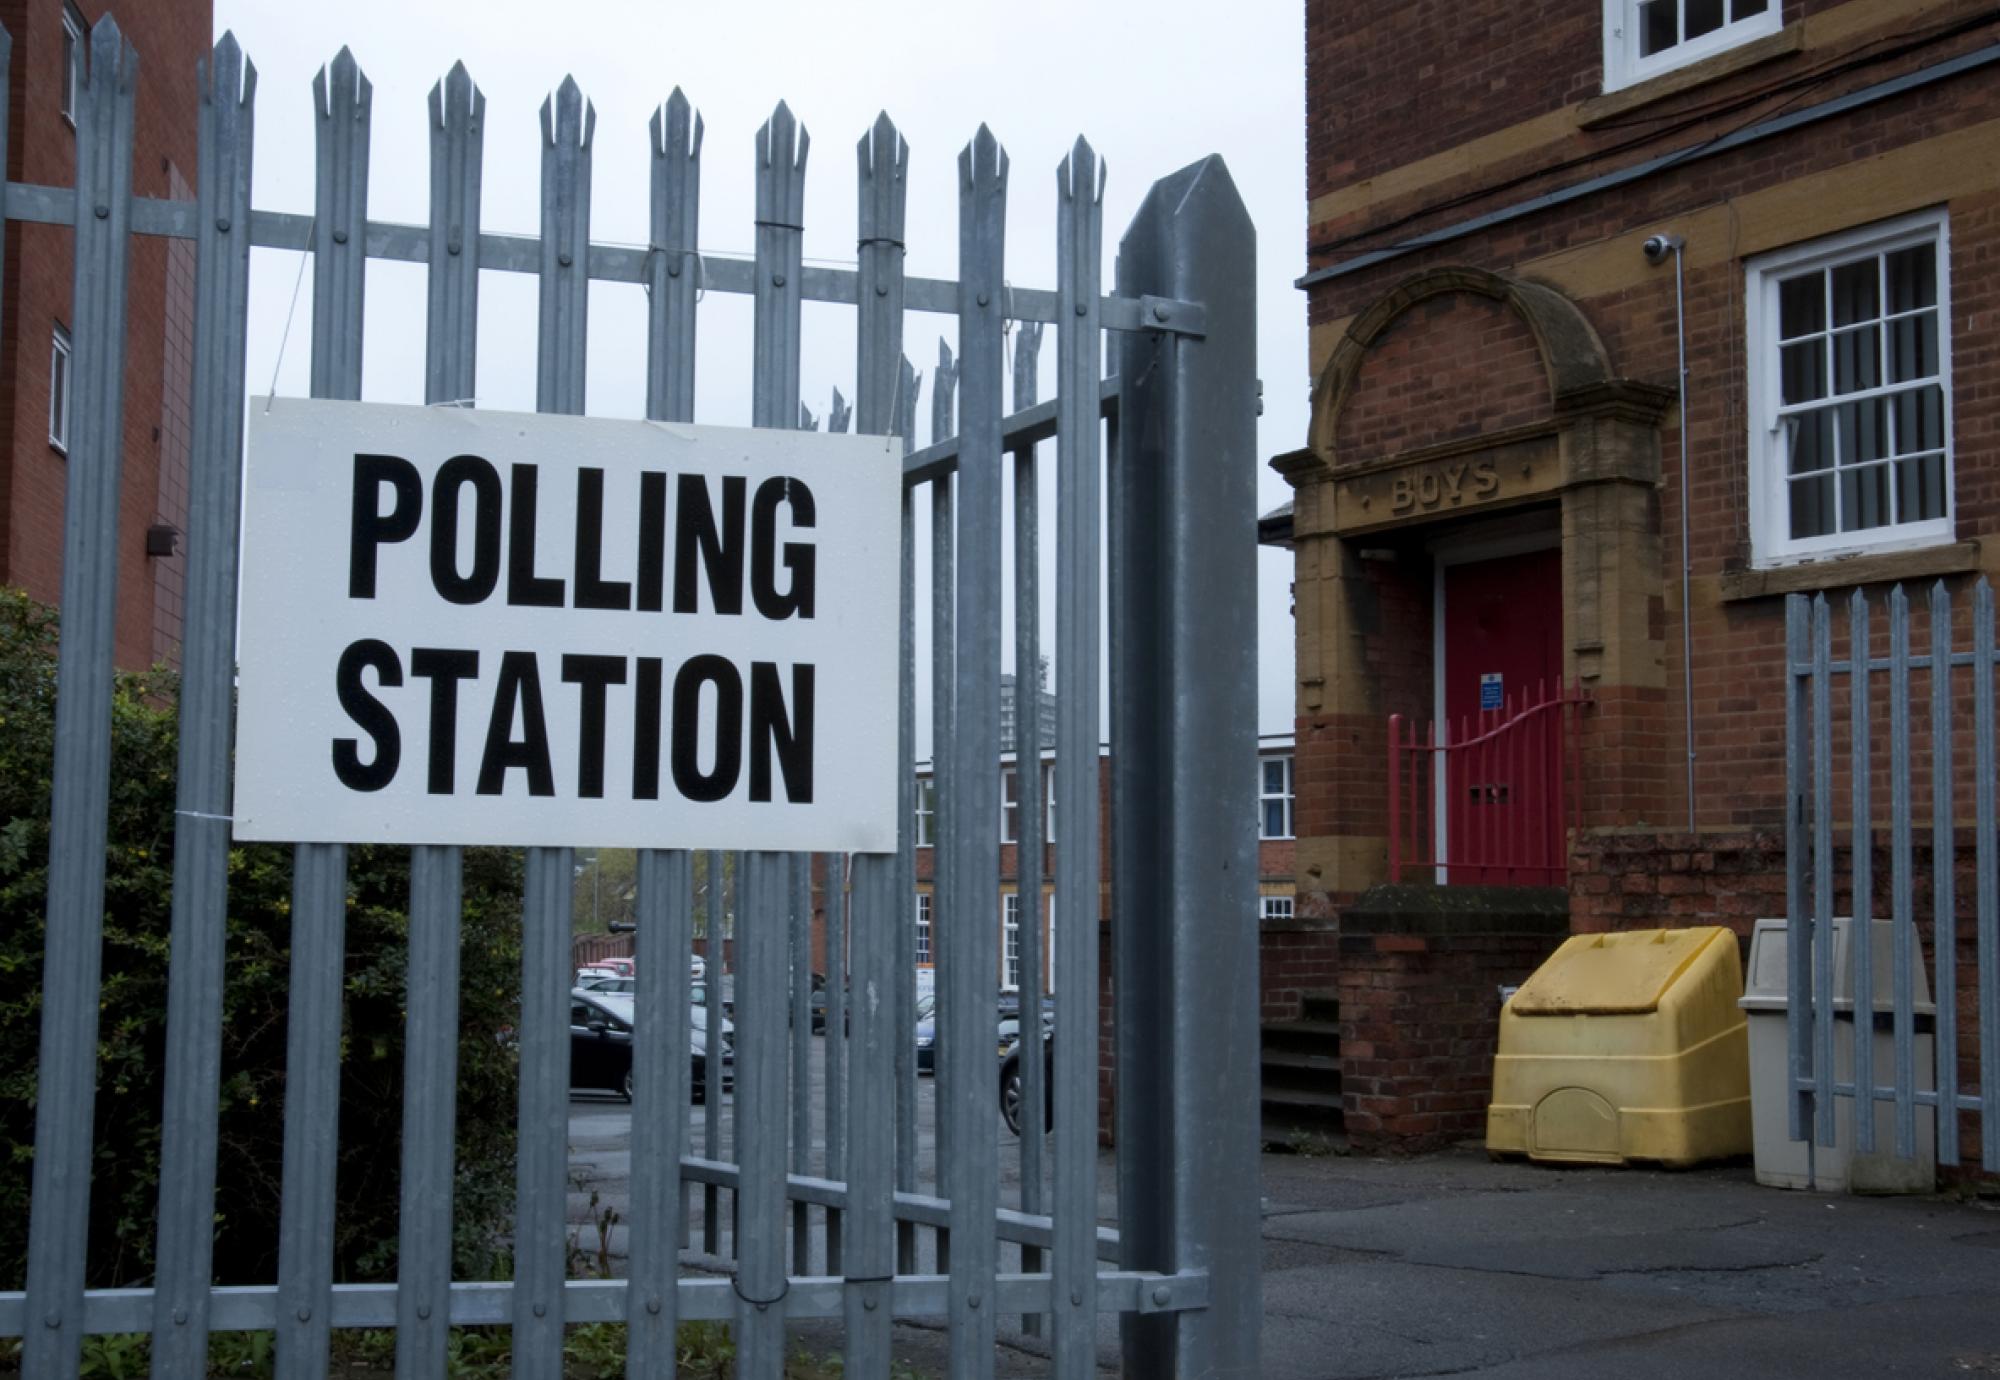 Polling station on election day. 